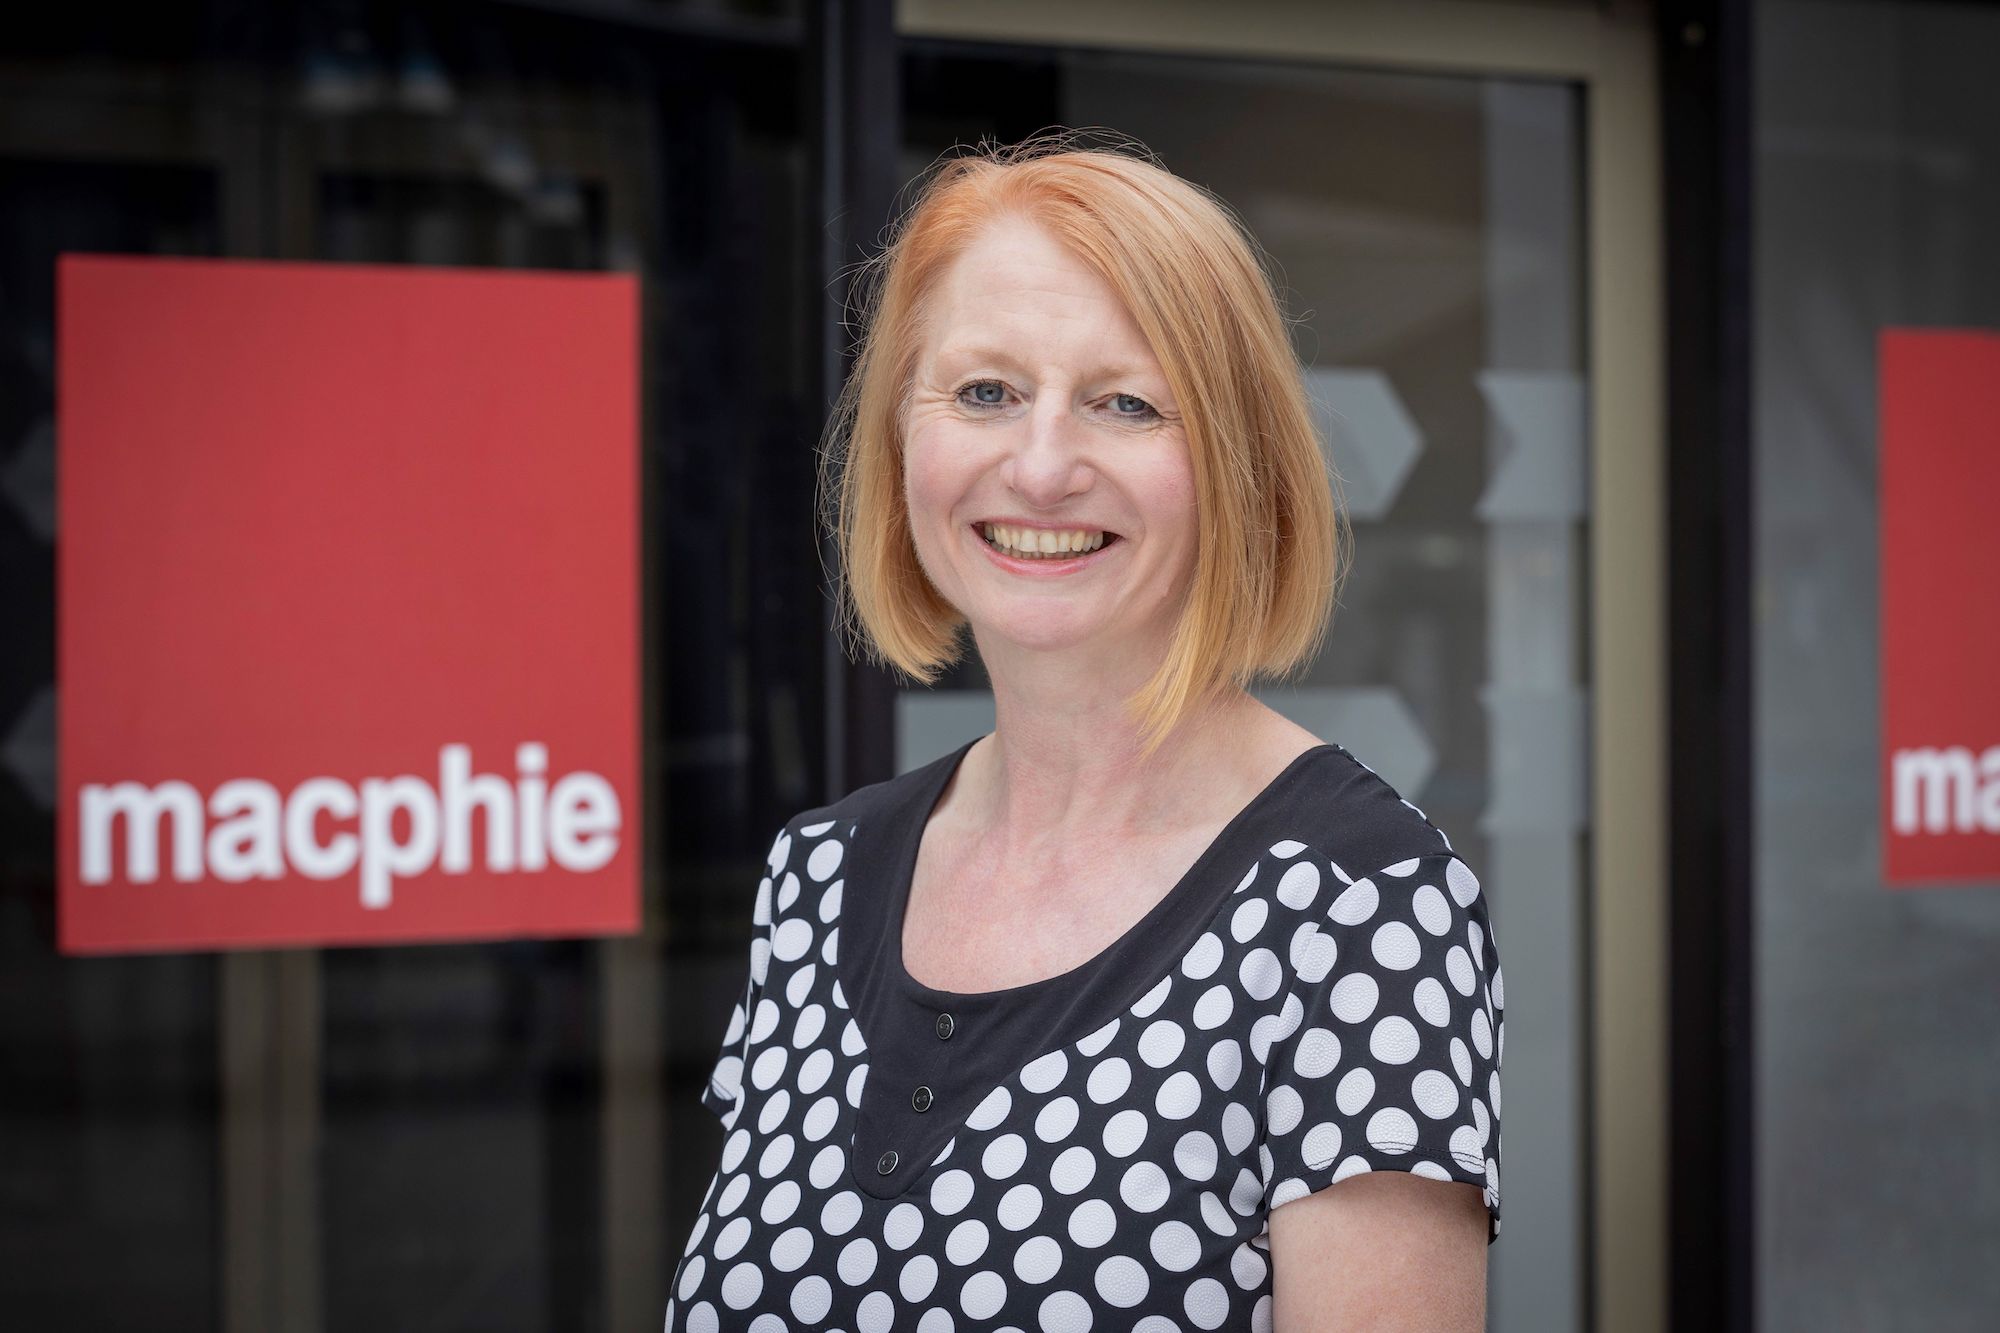 Food industry maestro joins Macphie to drive fresh growth